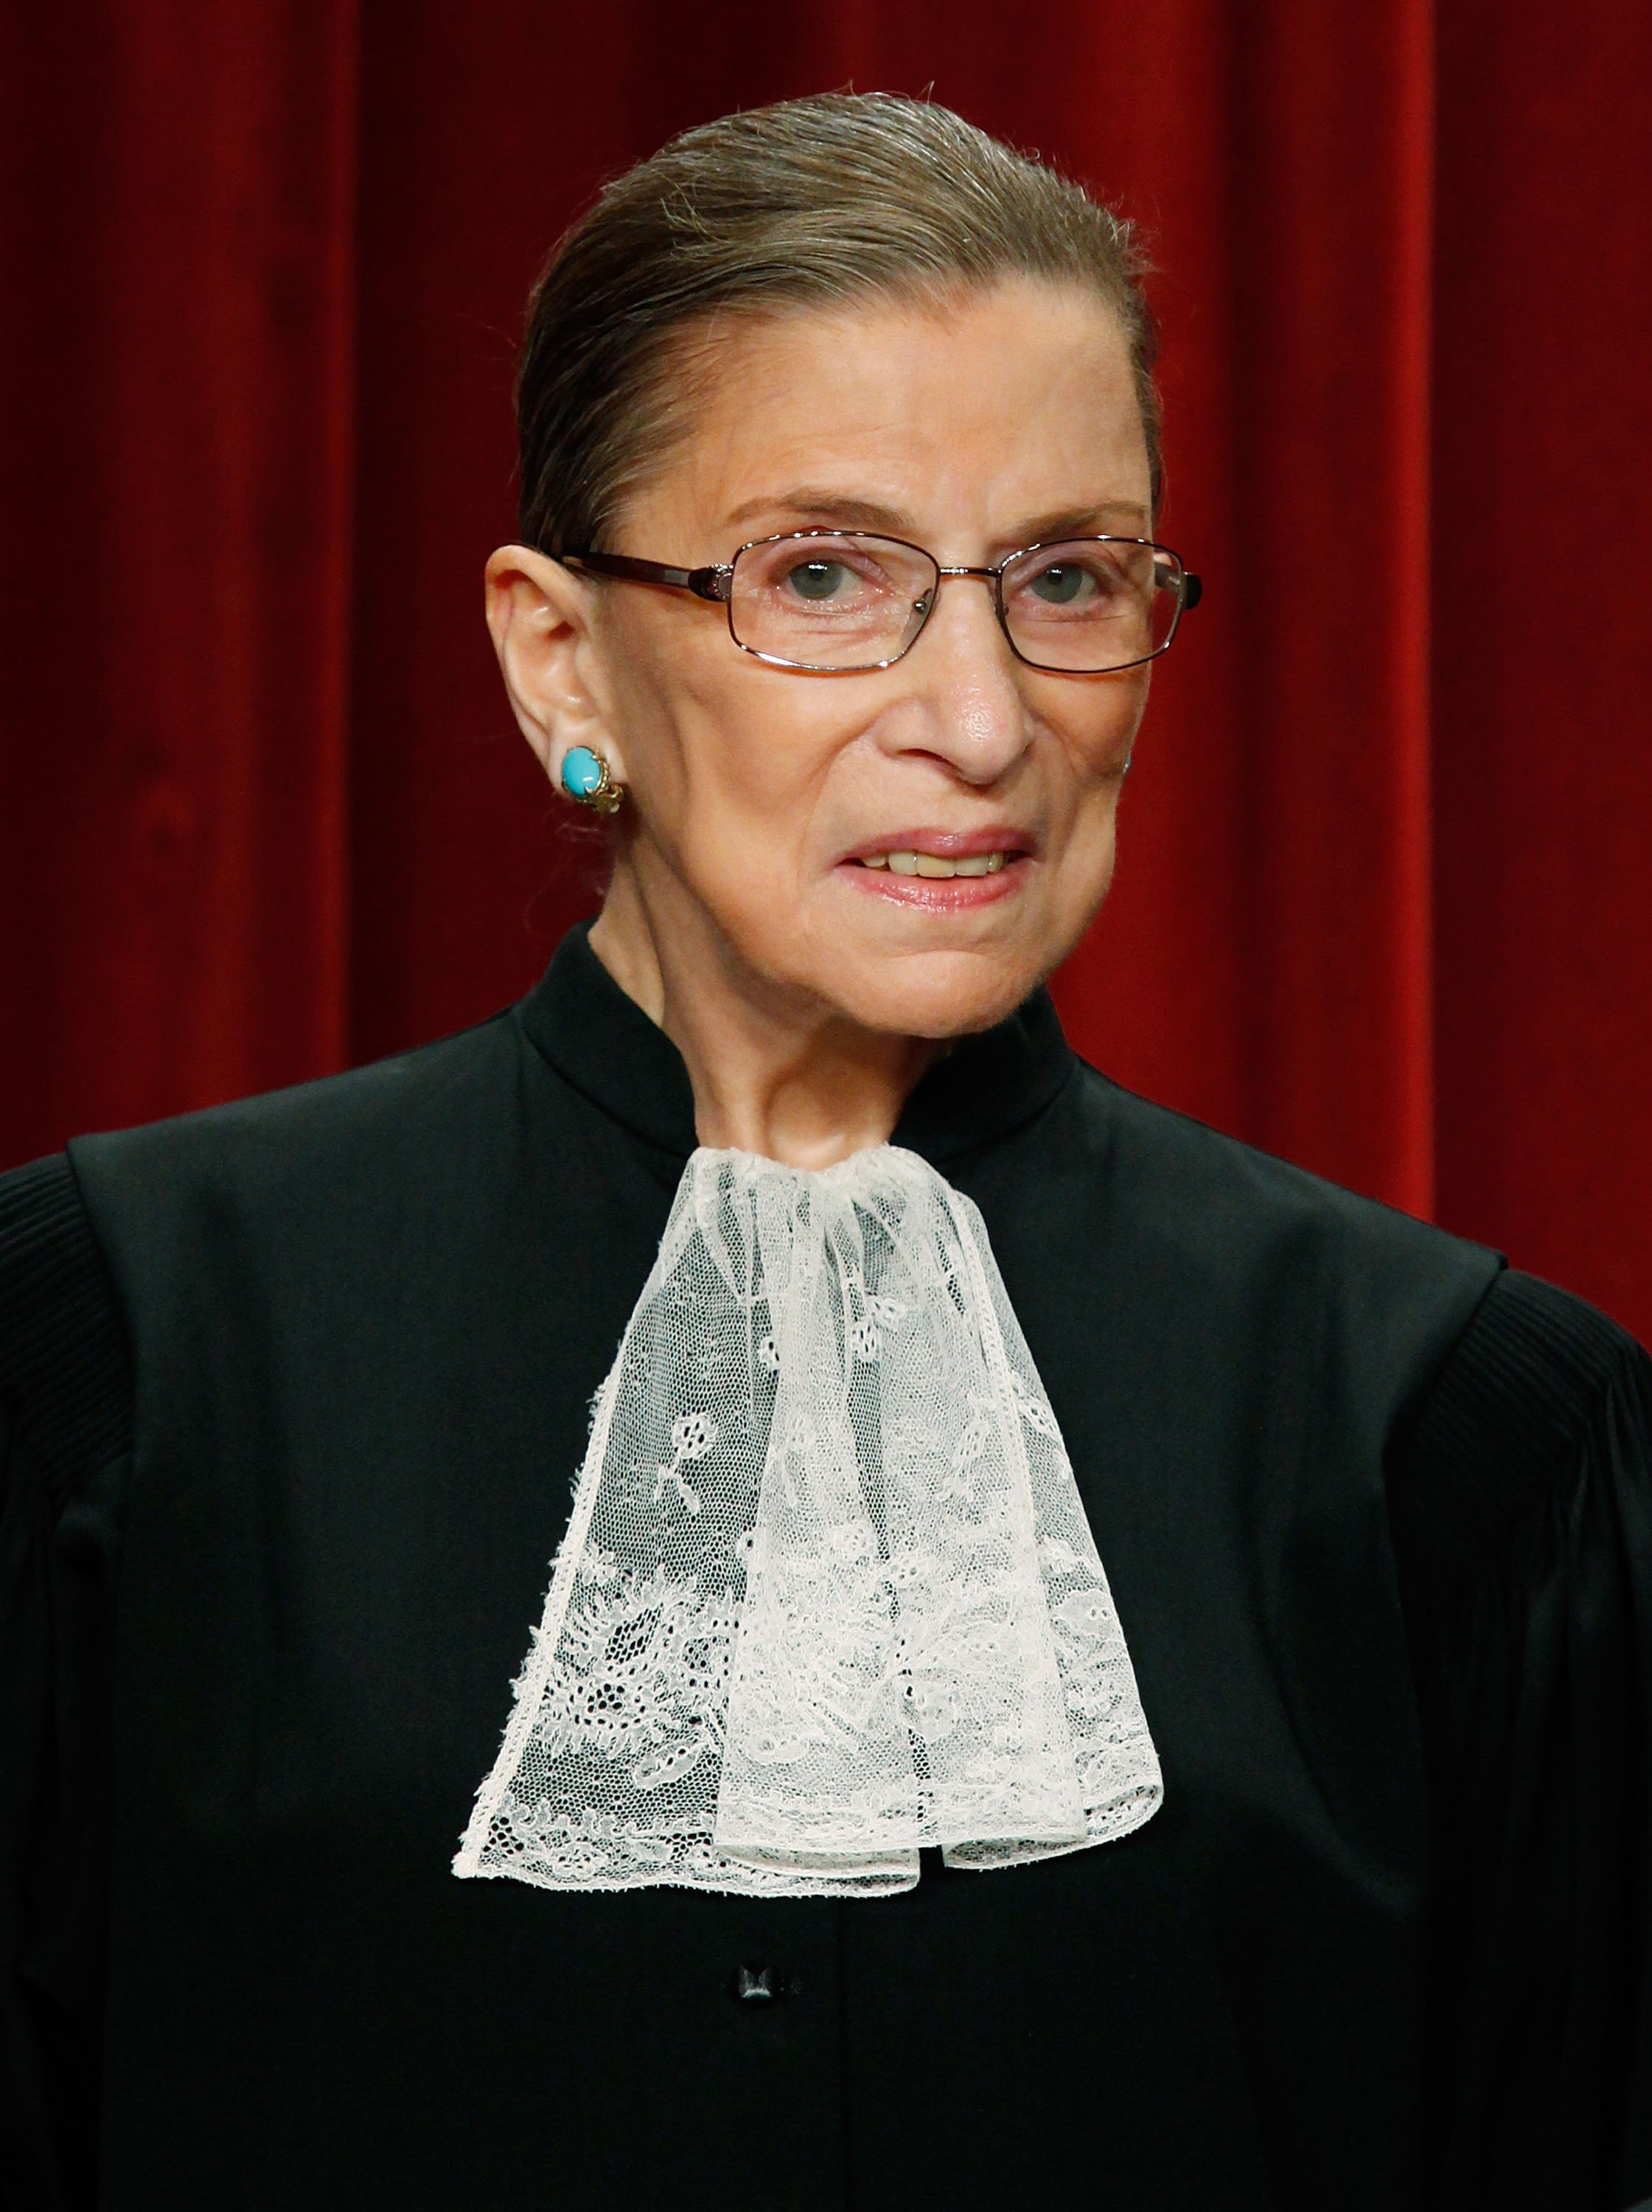 ustice Ruth Bader Ginsburg poses at the Supreme Court building on September 29, 2009, in Washington, DC. | Source: Getty Images.